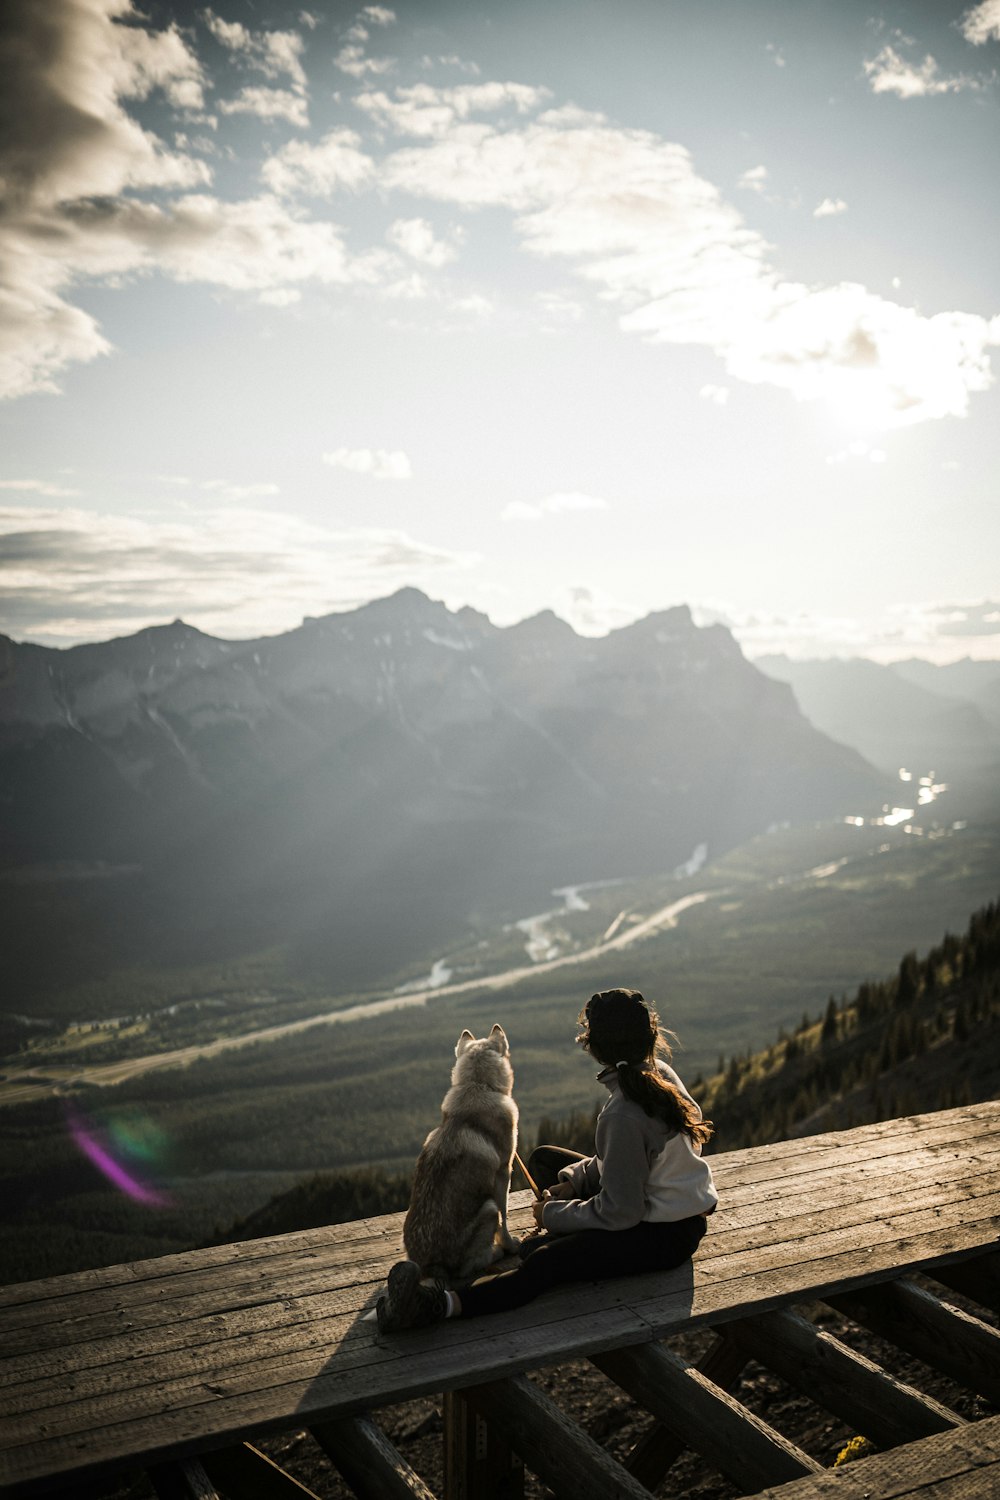 a person and a dog sitting on a wooden deck overlooking a valley